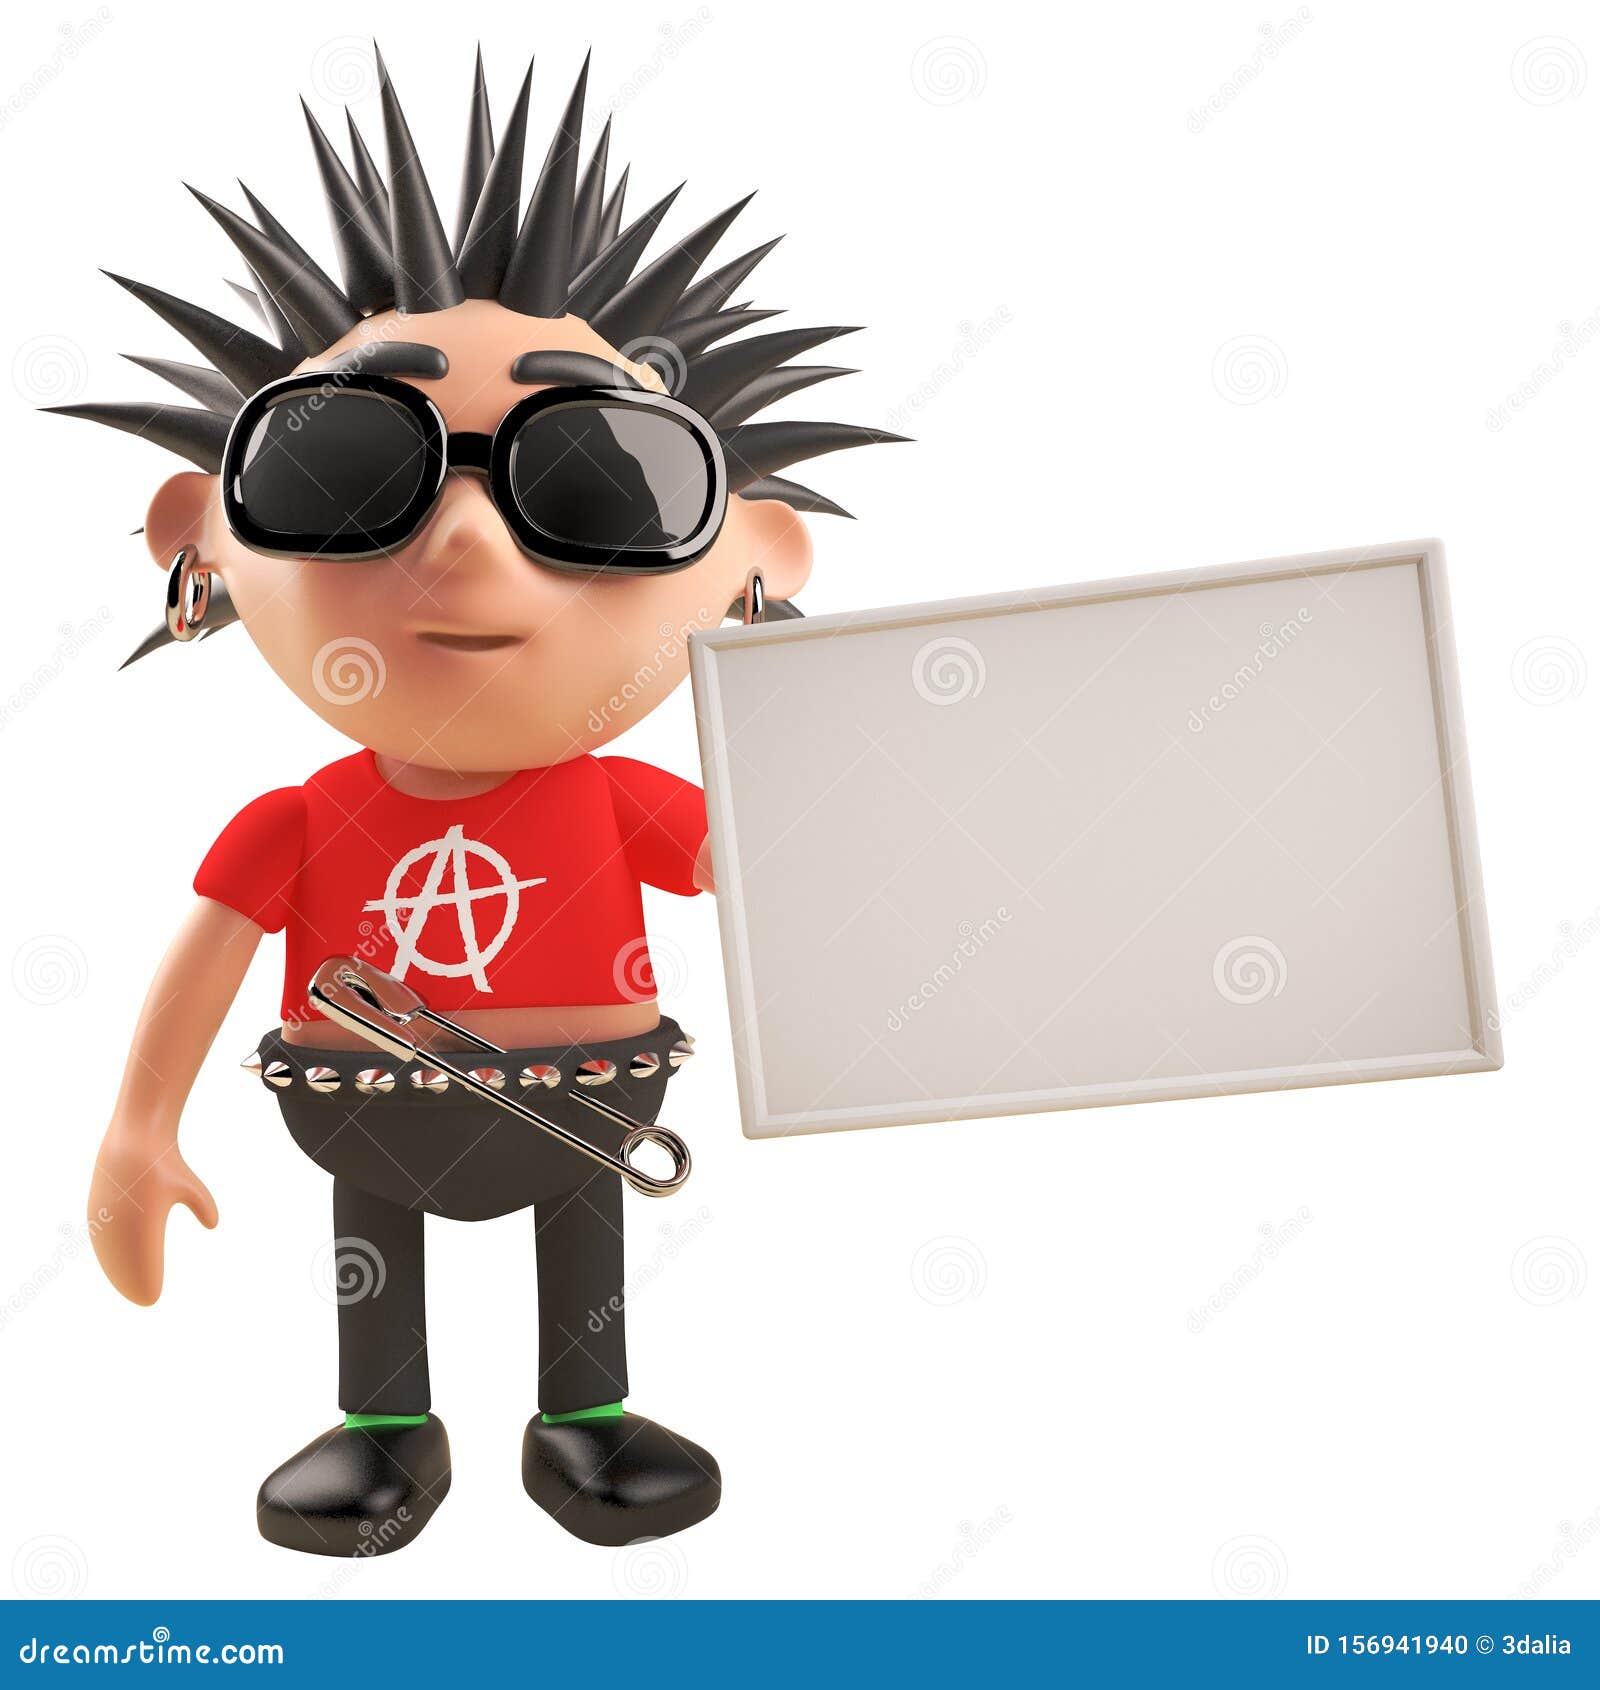 3d Punk Rock Cartoon Character with Spikey Hair Holding a Blank Placard, 3d  Illustration Stock Illustration - Illustration of hair, aggression:  156941940